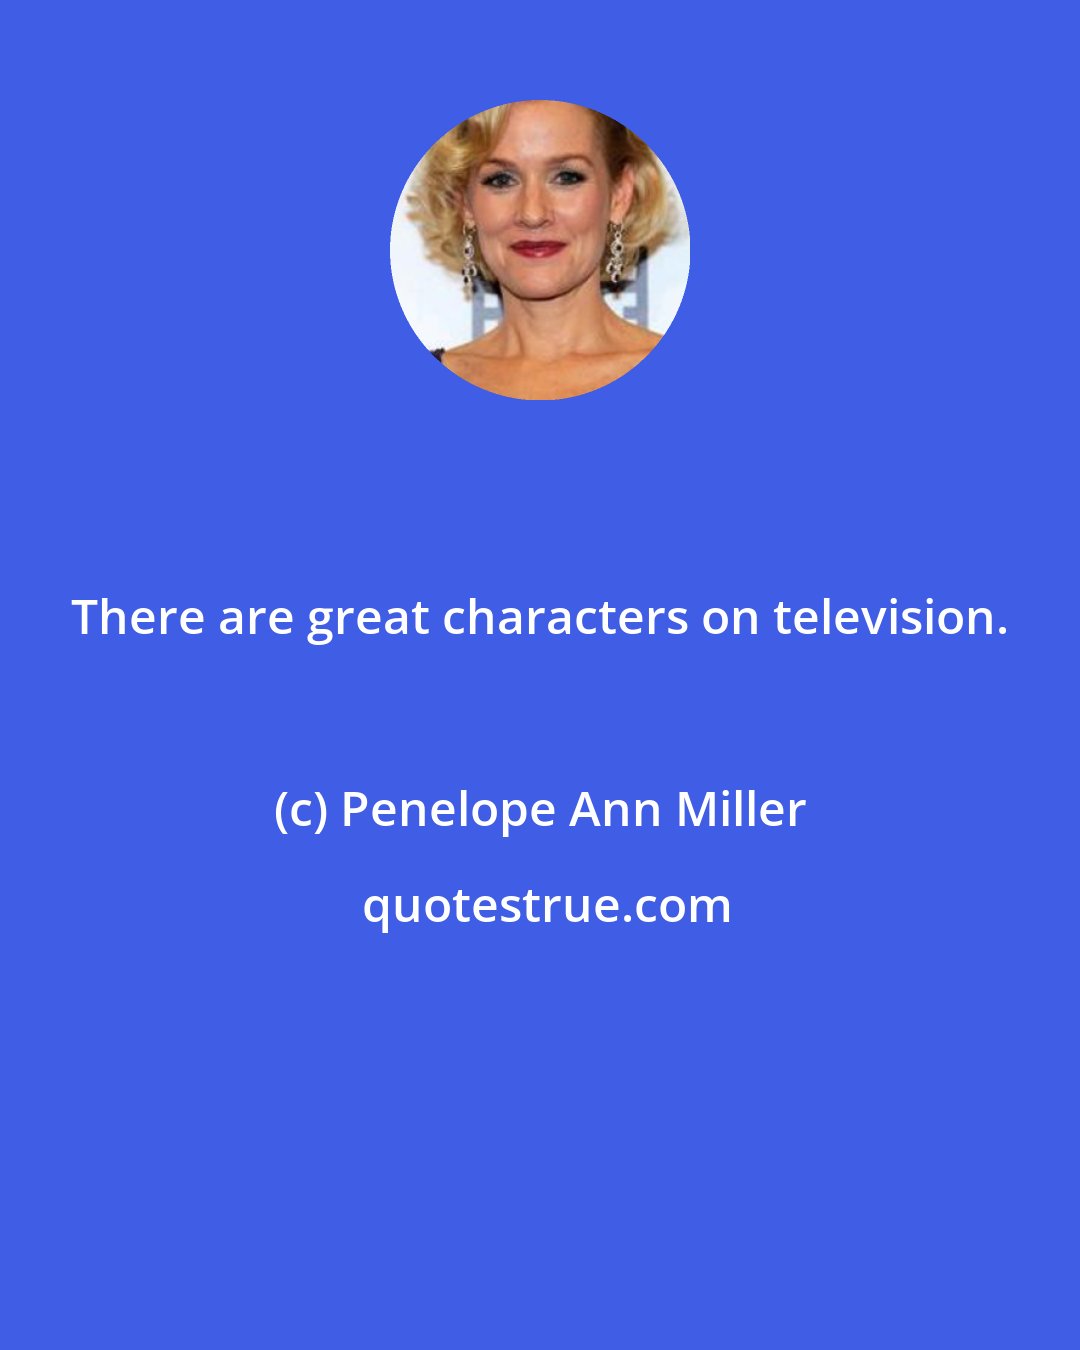 Penelope Ann Miller: There are great characters on television.